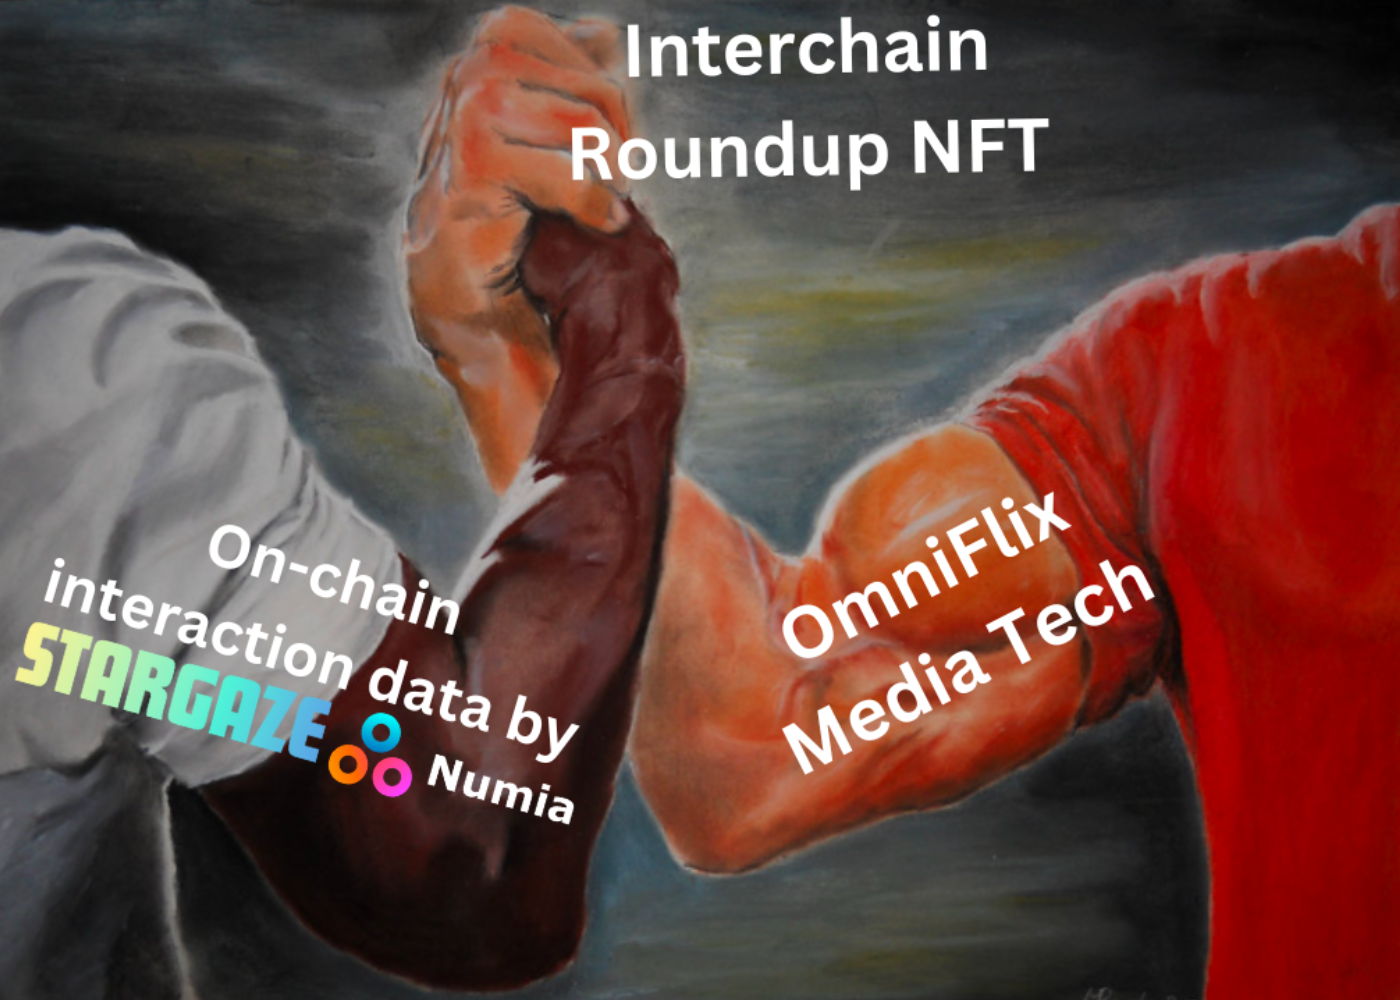 Thanks to Numia & Stargaze team for providing OmniFlix with on-chain data